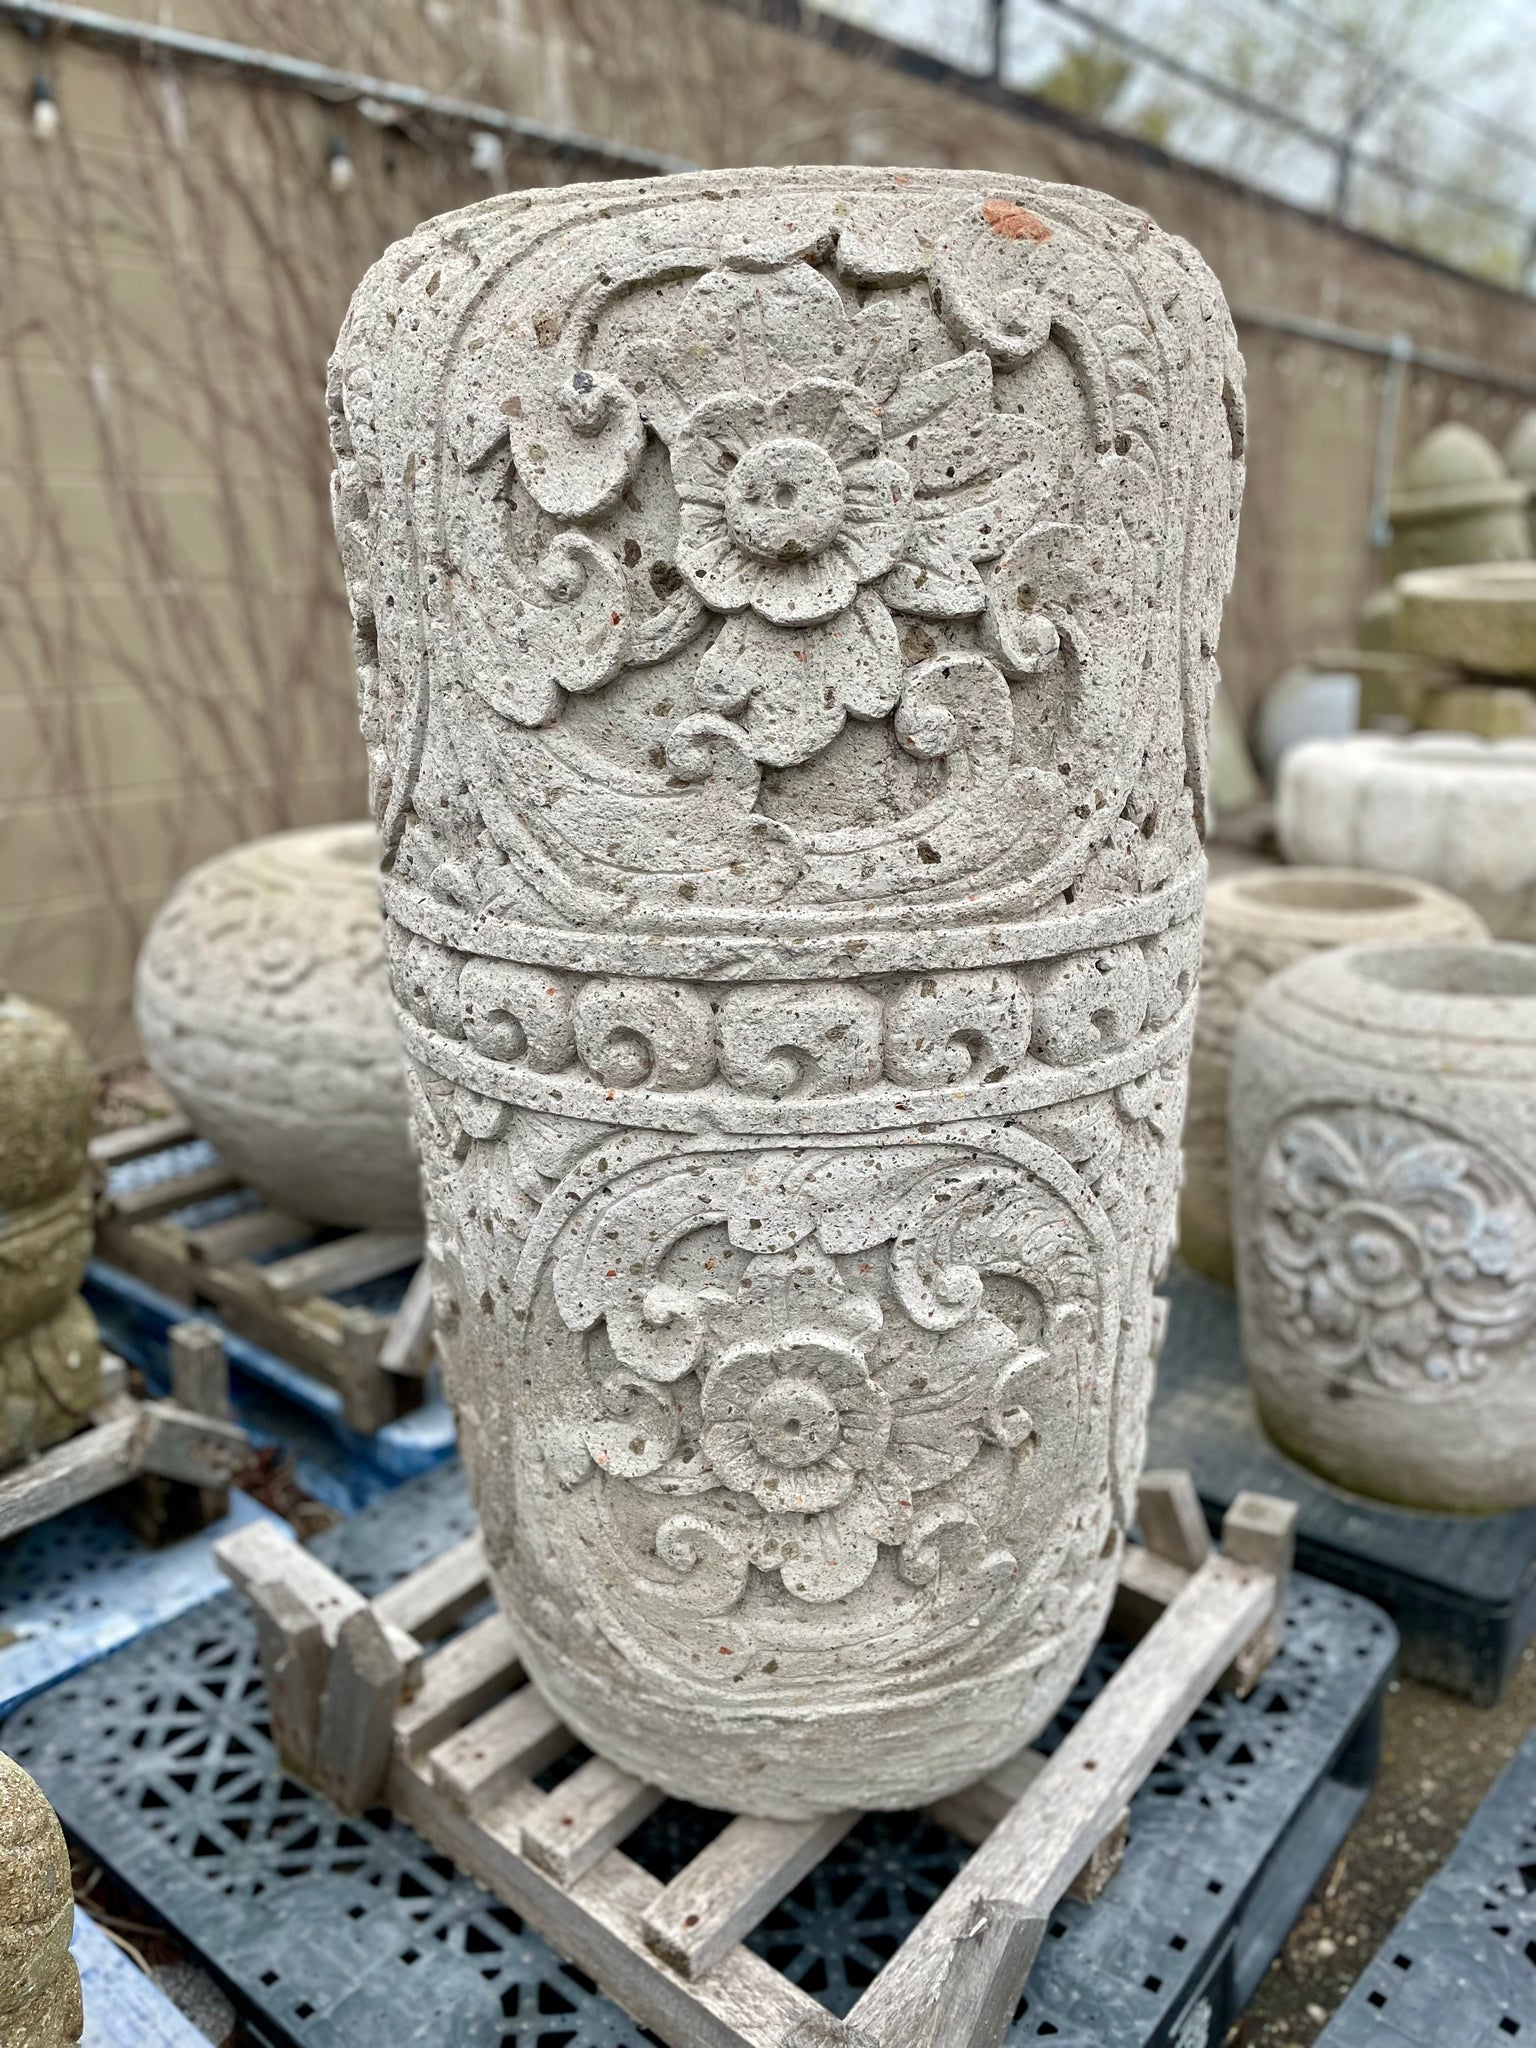 Balinese Stacked Stone Pots